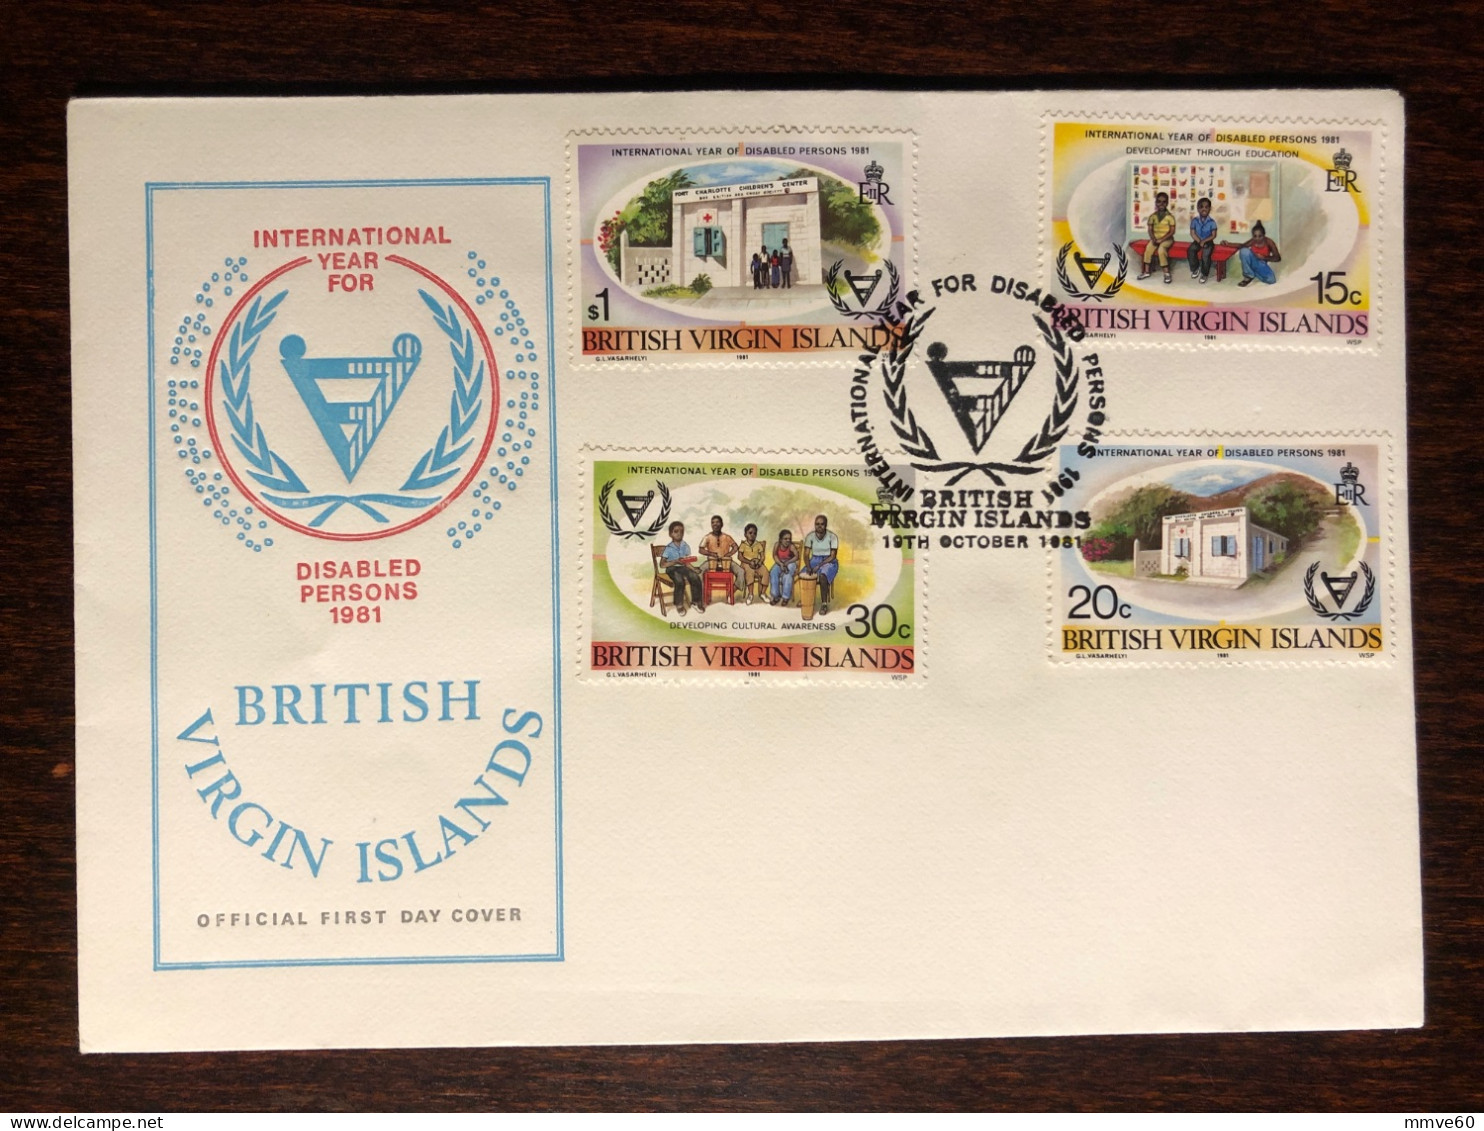 VIRGIN ISLANDS FDC COVER 1981 YEAR DISABLED PEOPLE HEALTH MEDICINE STAMPS - Iles Vièrges Britanniques